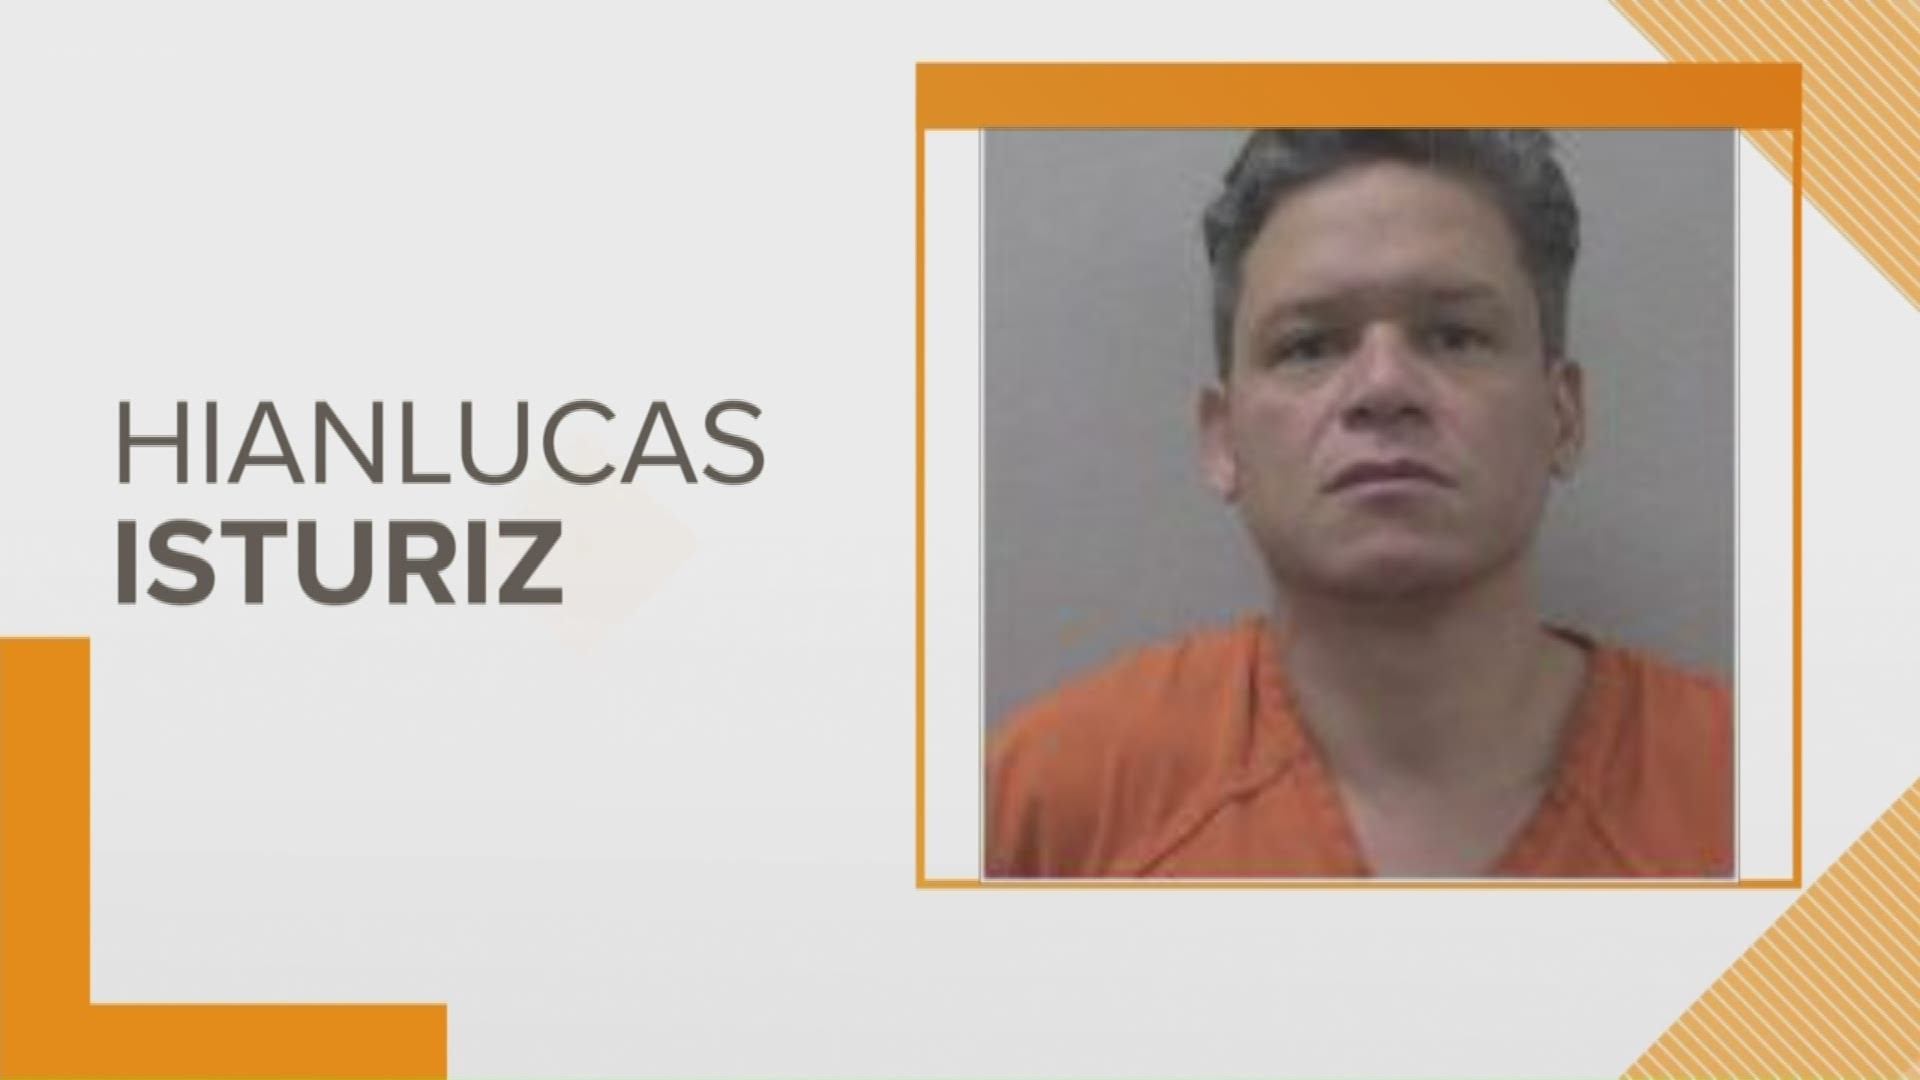 According to arrest warrants, Hianlucas Isturiz Rodriguez, 42, is being charged with two counts of criminal sexual conduct with a minor.